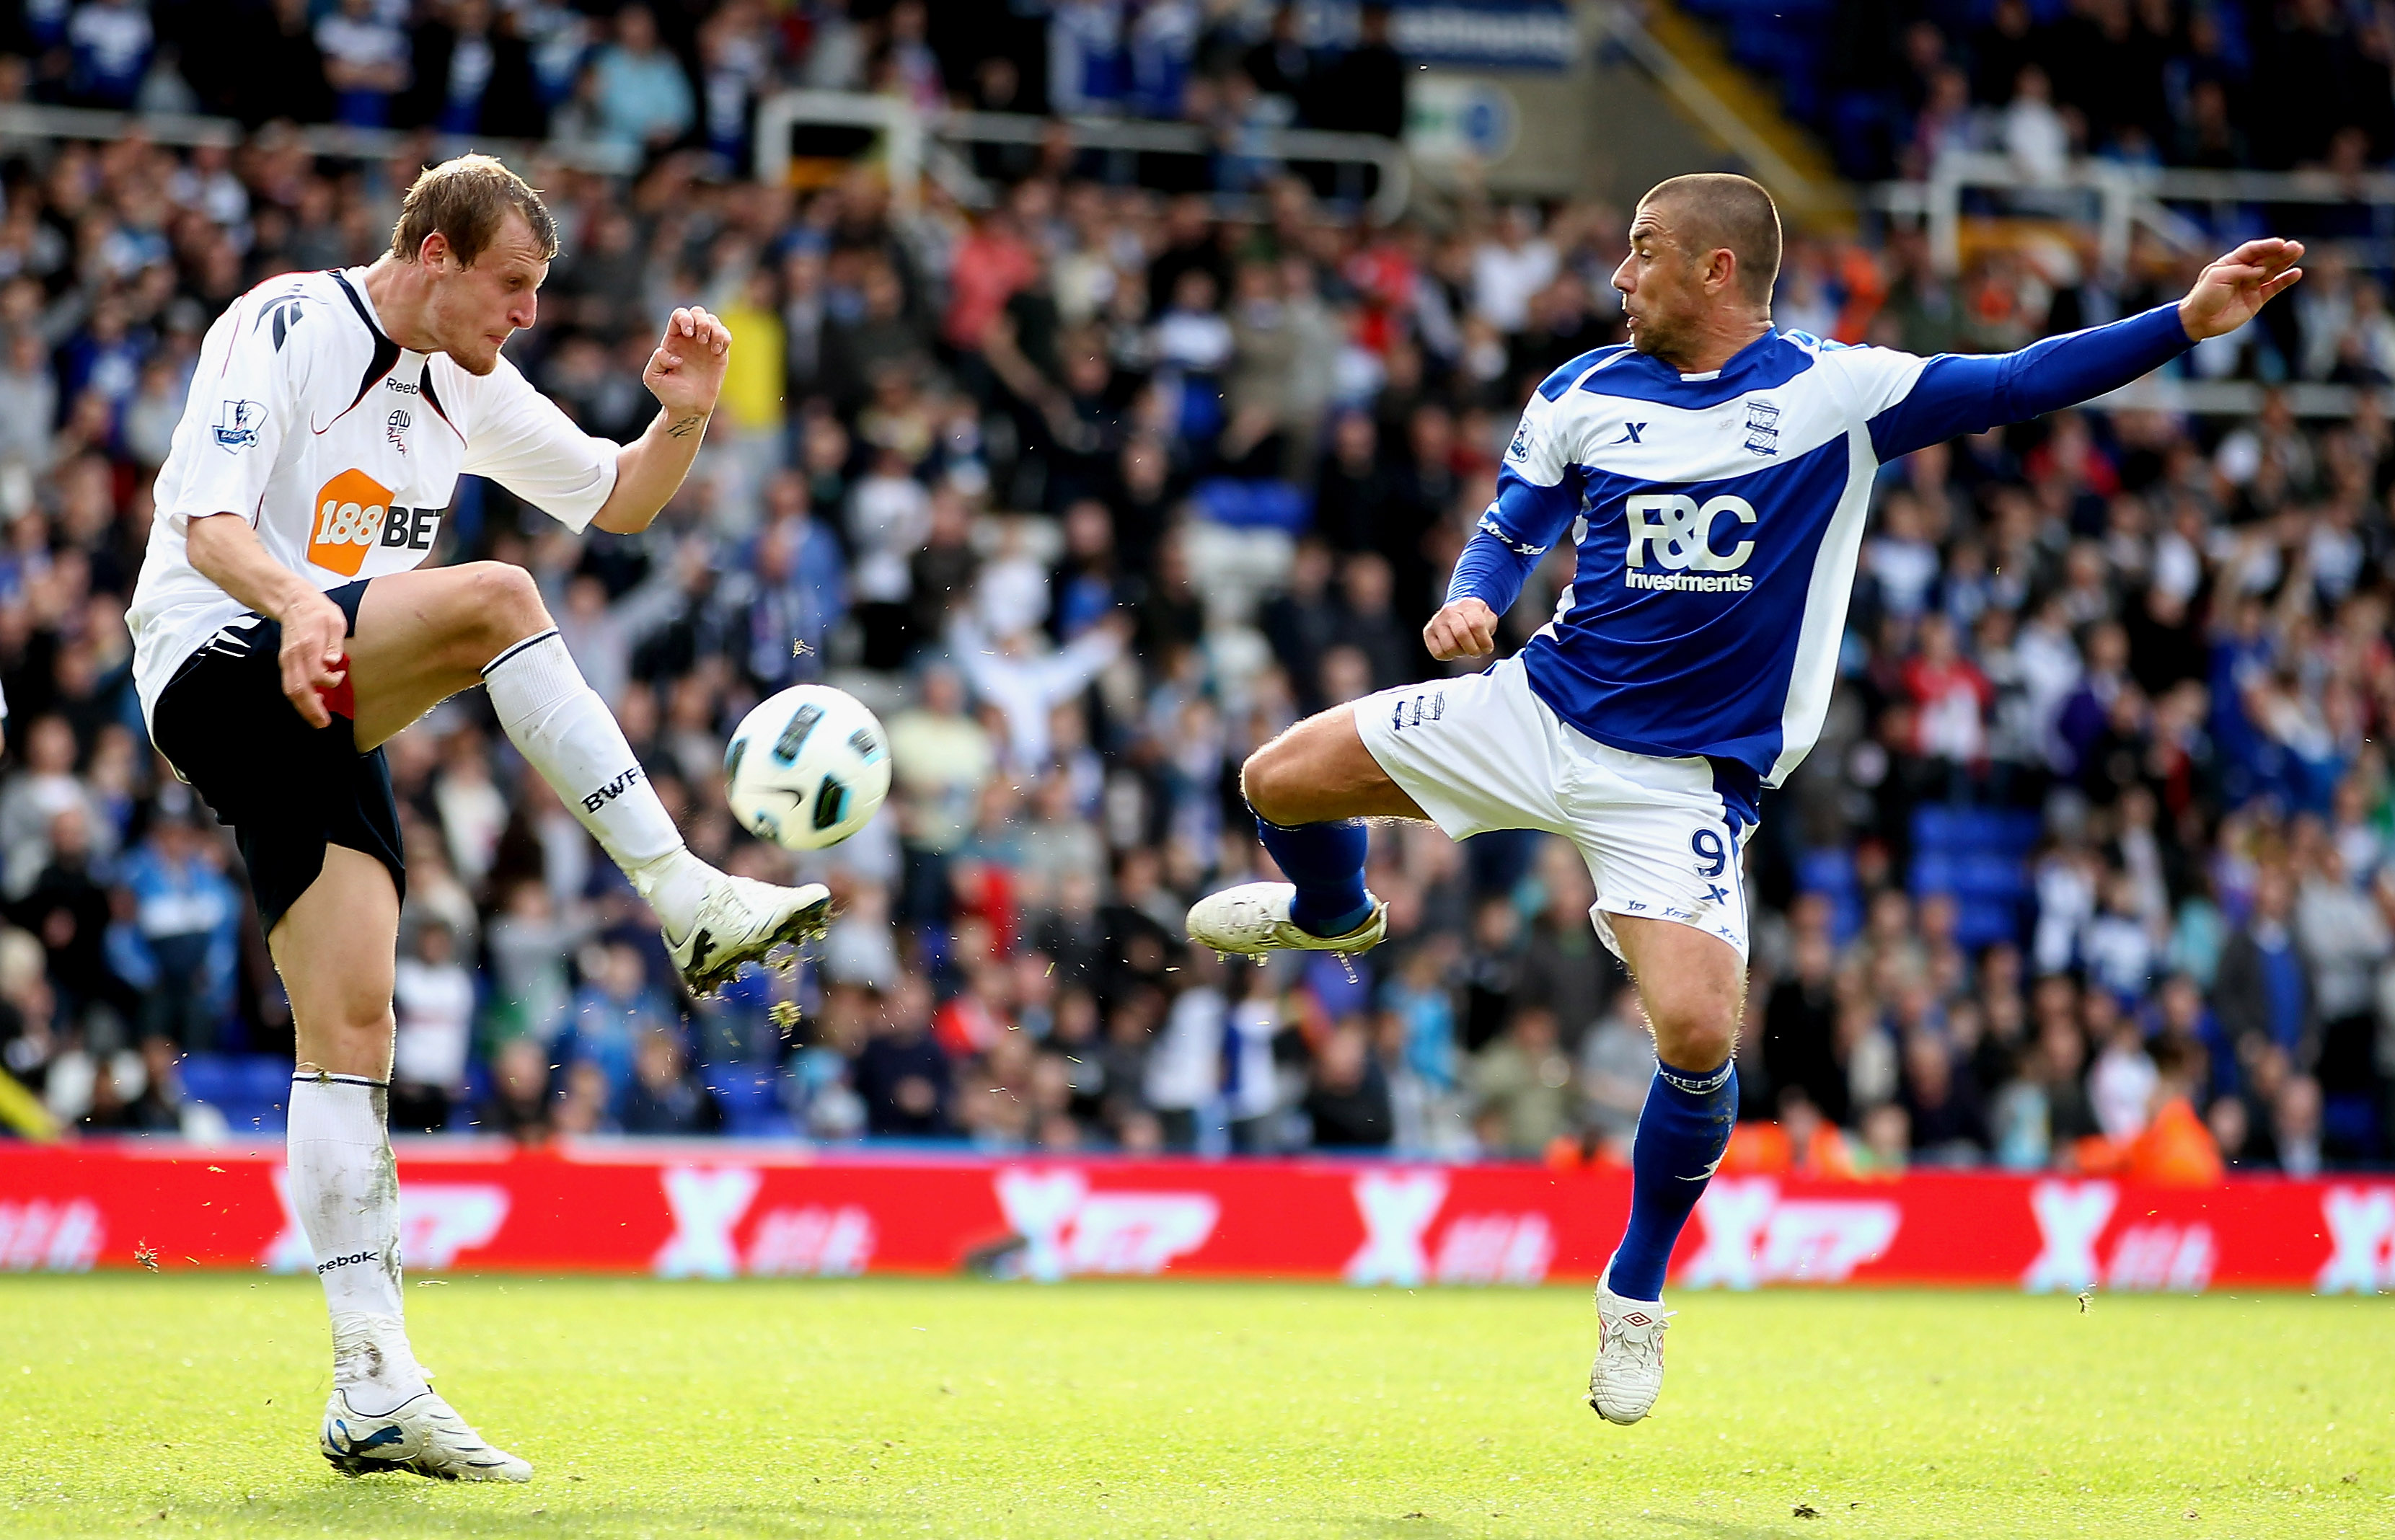 BIRMINGHAM, ENGLAND - APRIL 02:  David Wheater of Bolton (L) in action with Kevin Phillips of Birmingham during the Barclays Premier League match between Birmingham City and Bolton Wanderers at St.Andrews, on April 2, 2011 in Birmingham, England.  (Photo